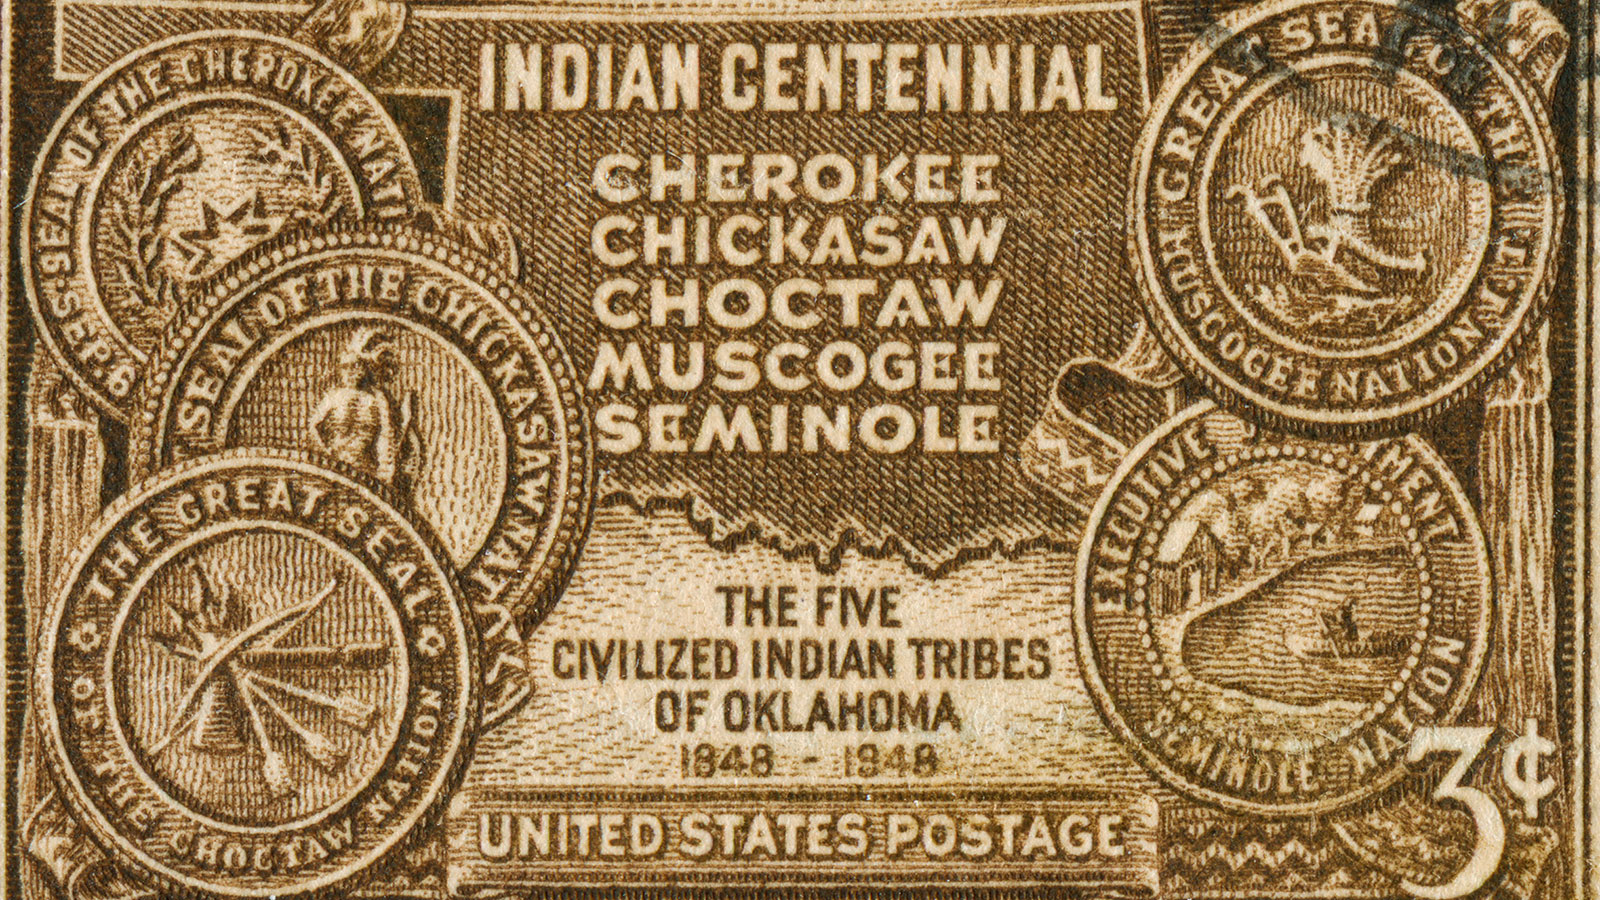 what happened to the indian territory tribes when it became part of oklahoma